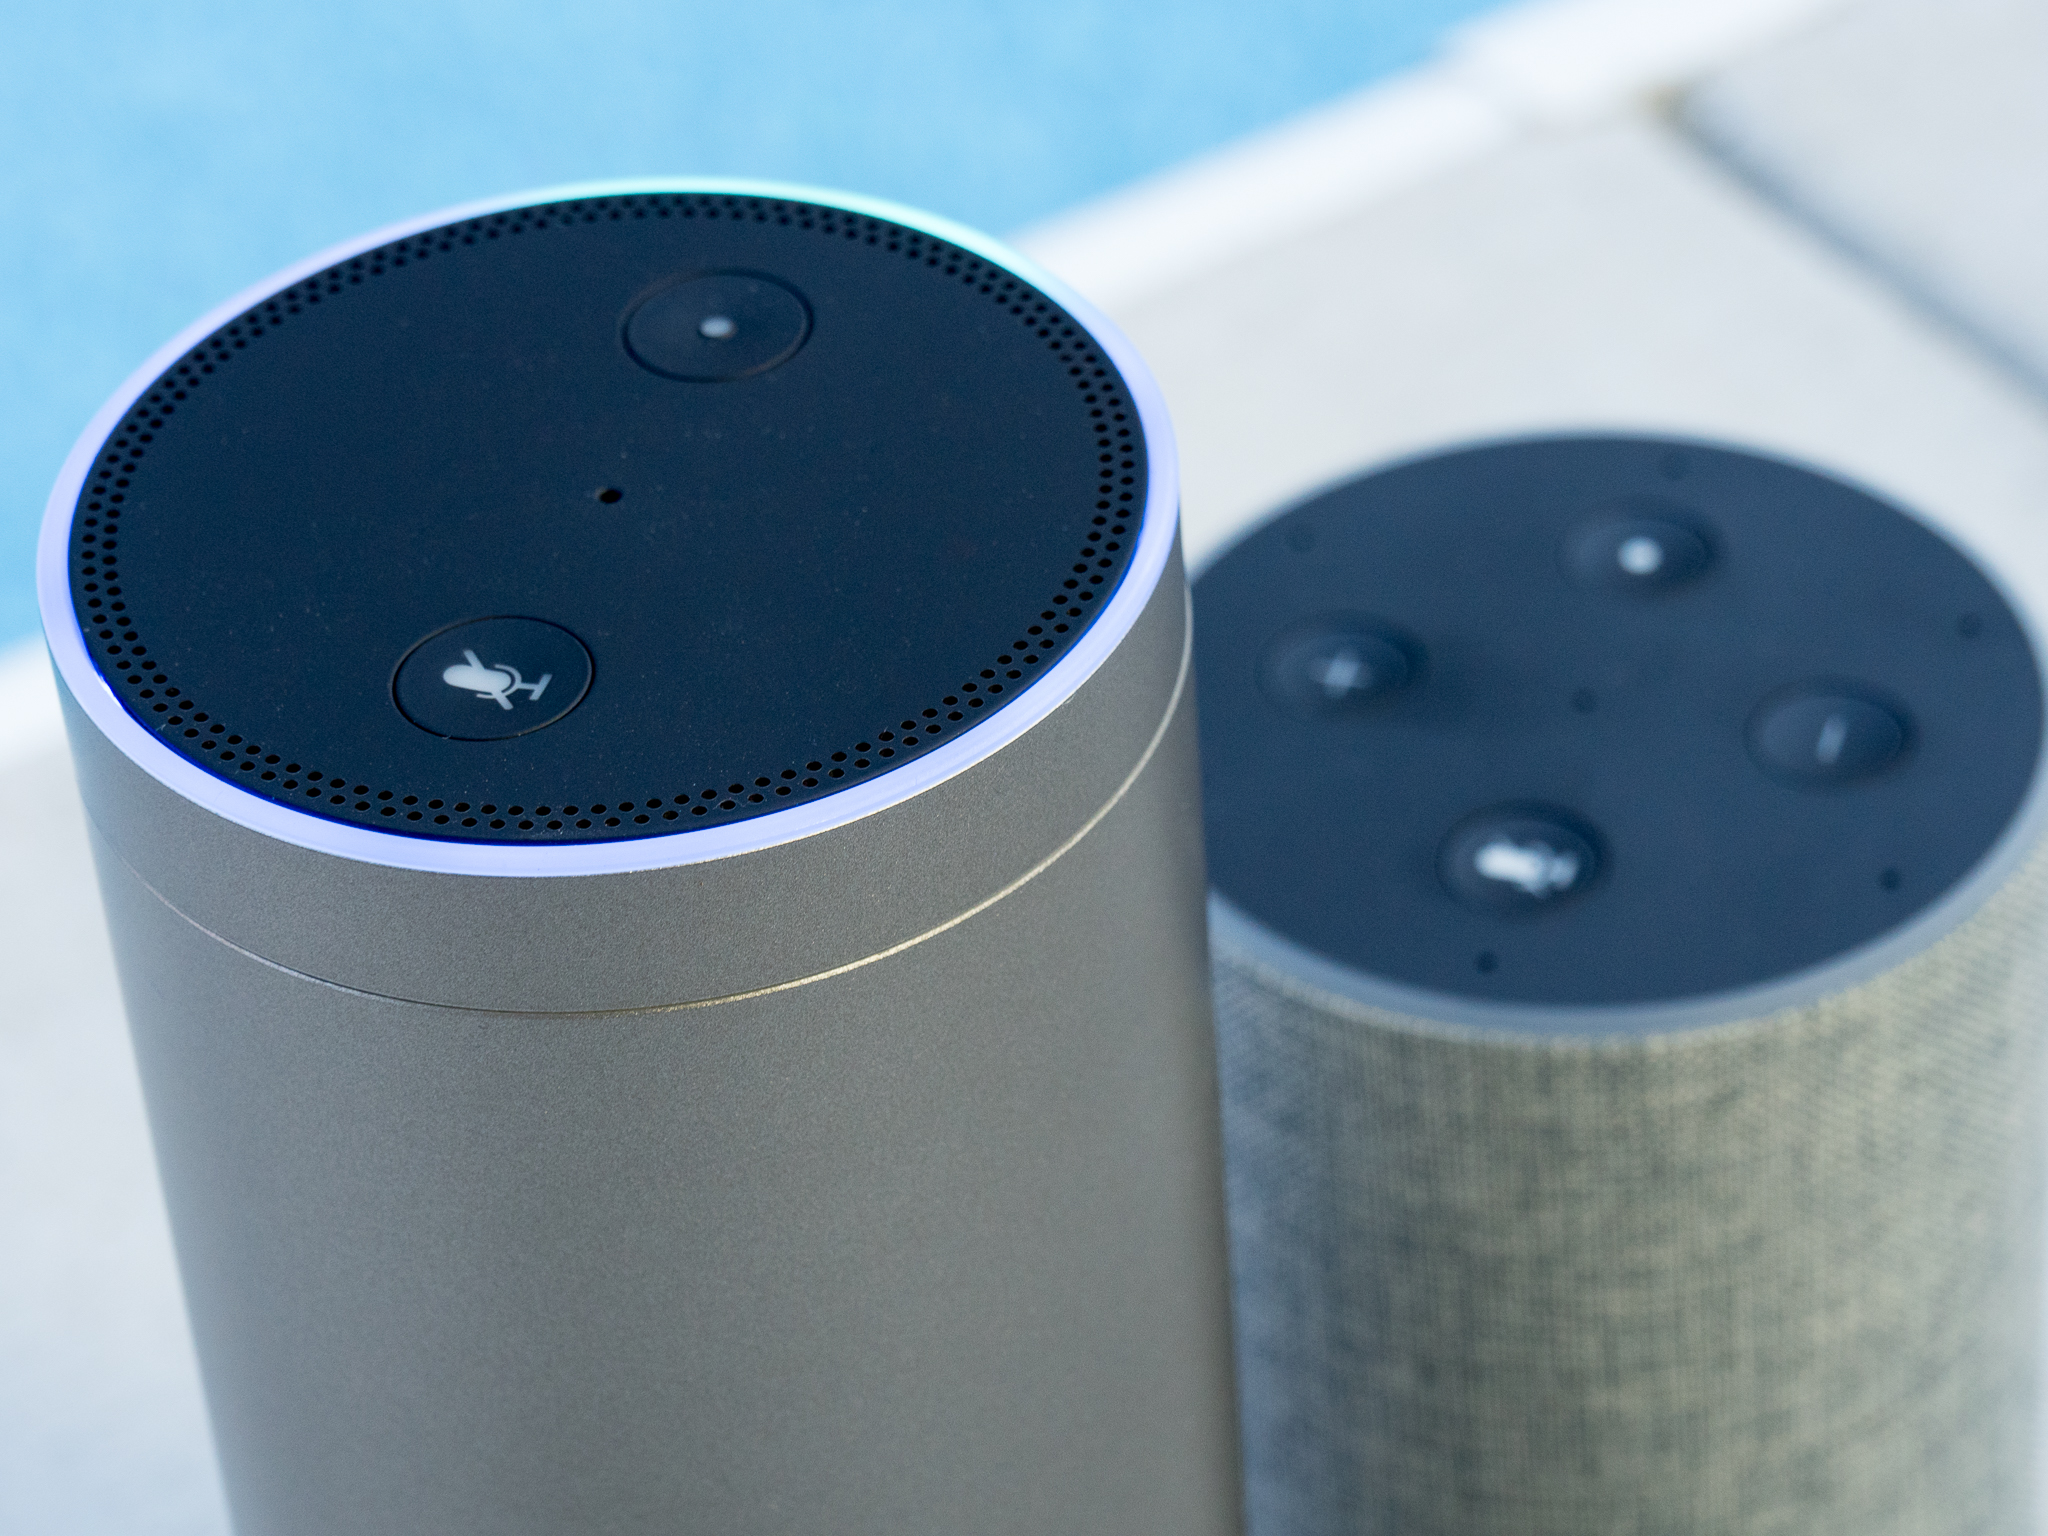 Steps to Pair two Amazon Echo Speakers to Build Stereo Pair